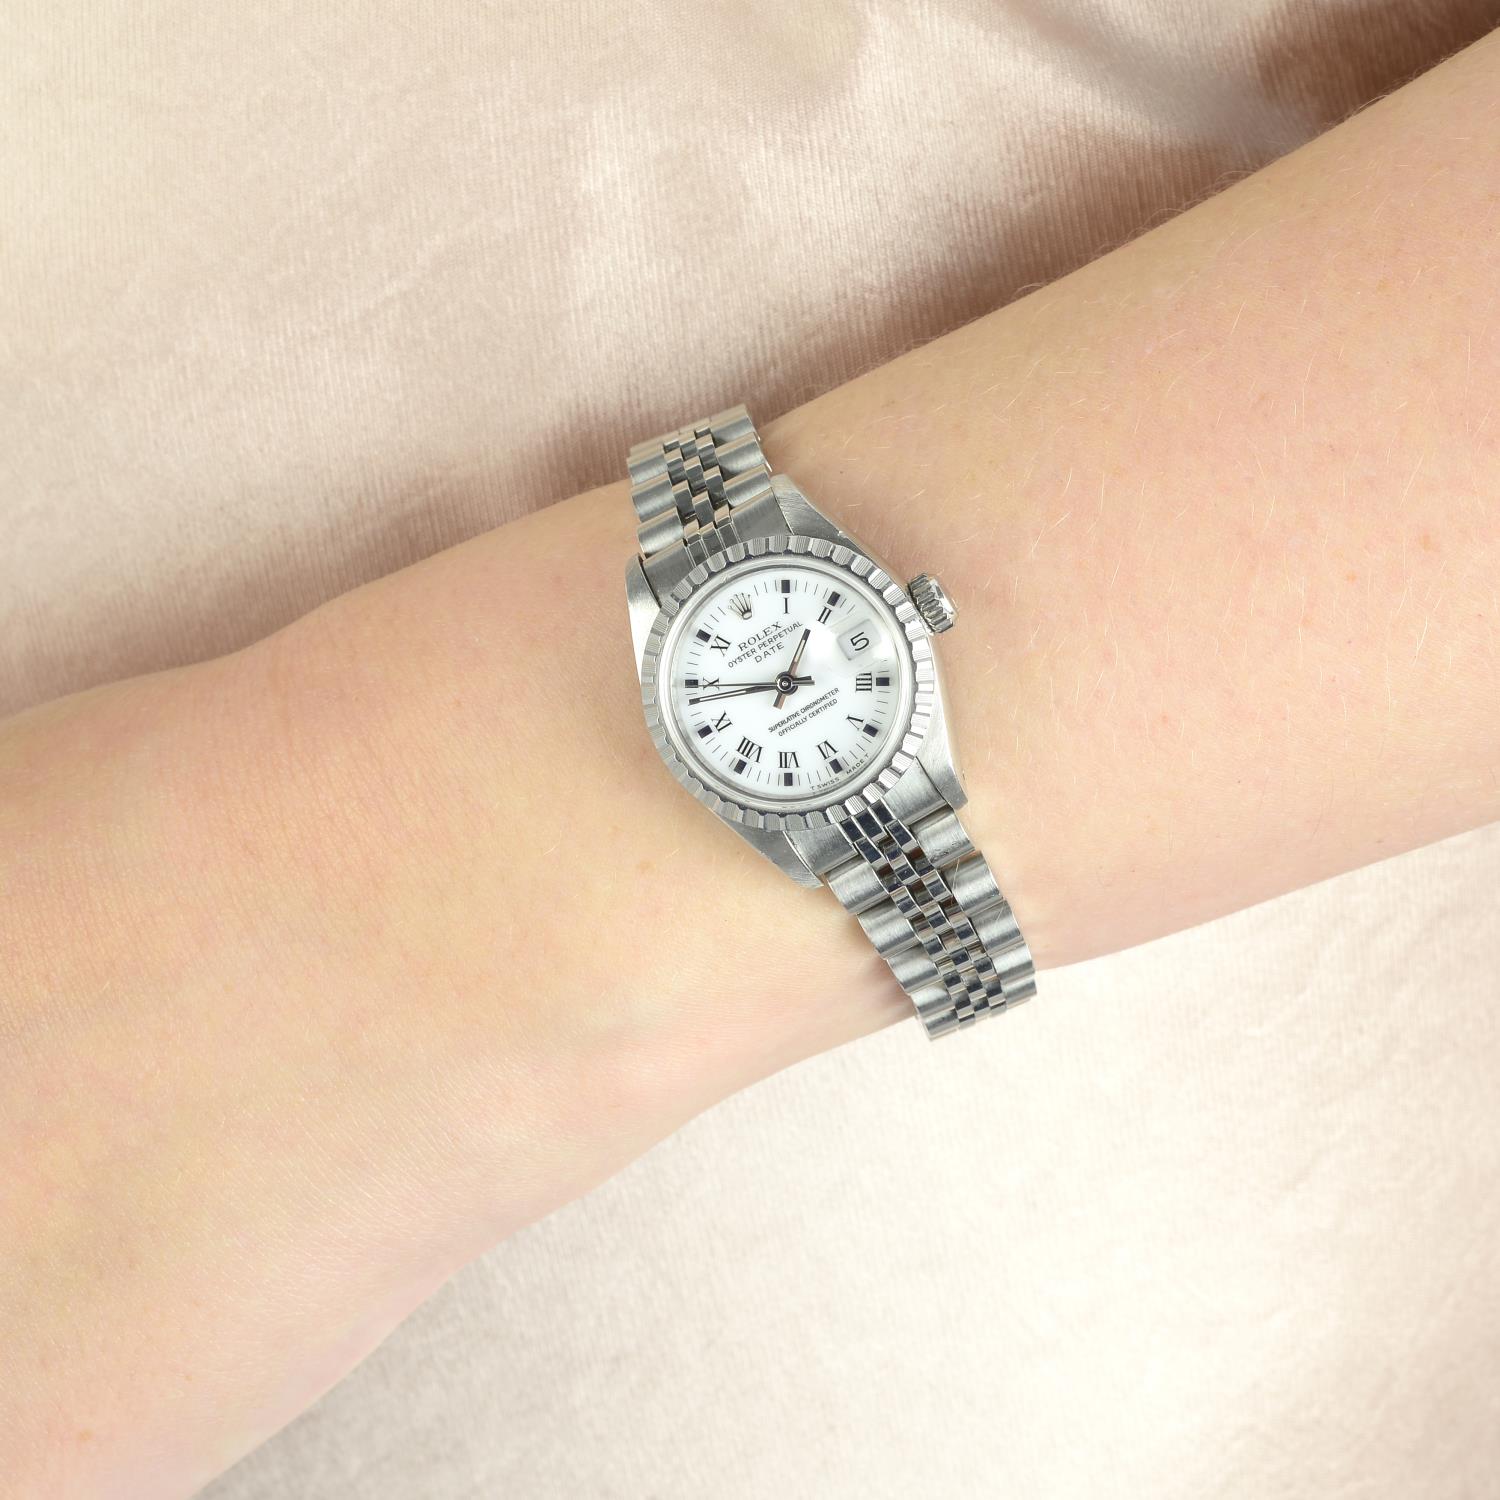 ROLEX - a lady's Oyster Perpetual Date bracelet watch. - Image 3 of 3